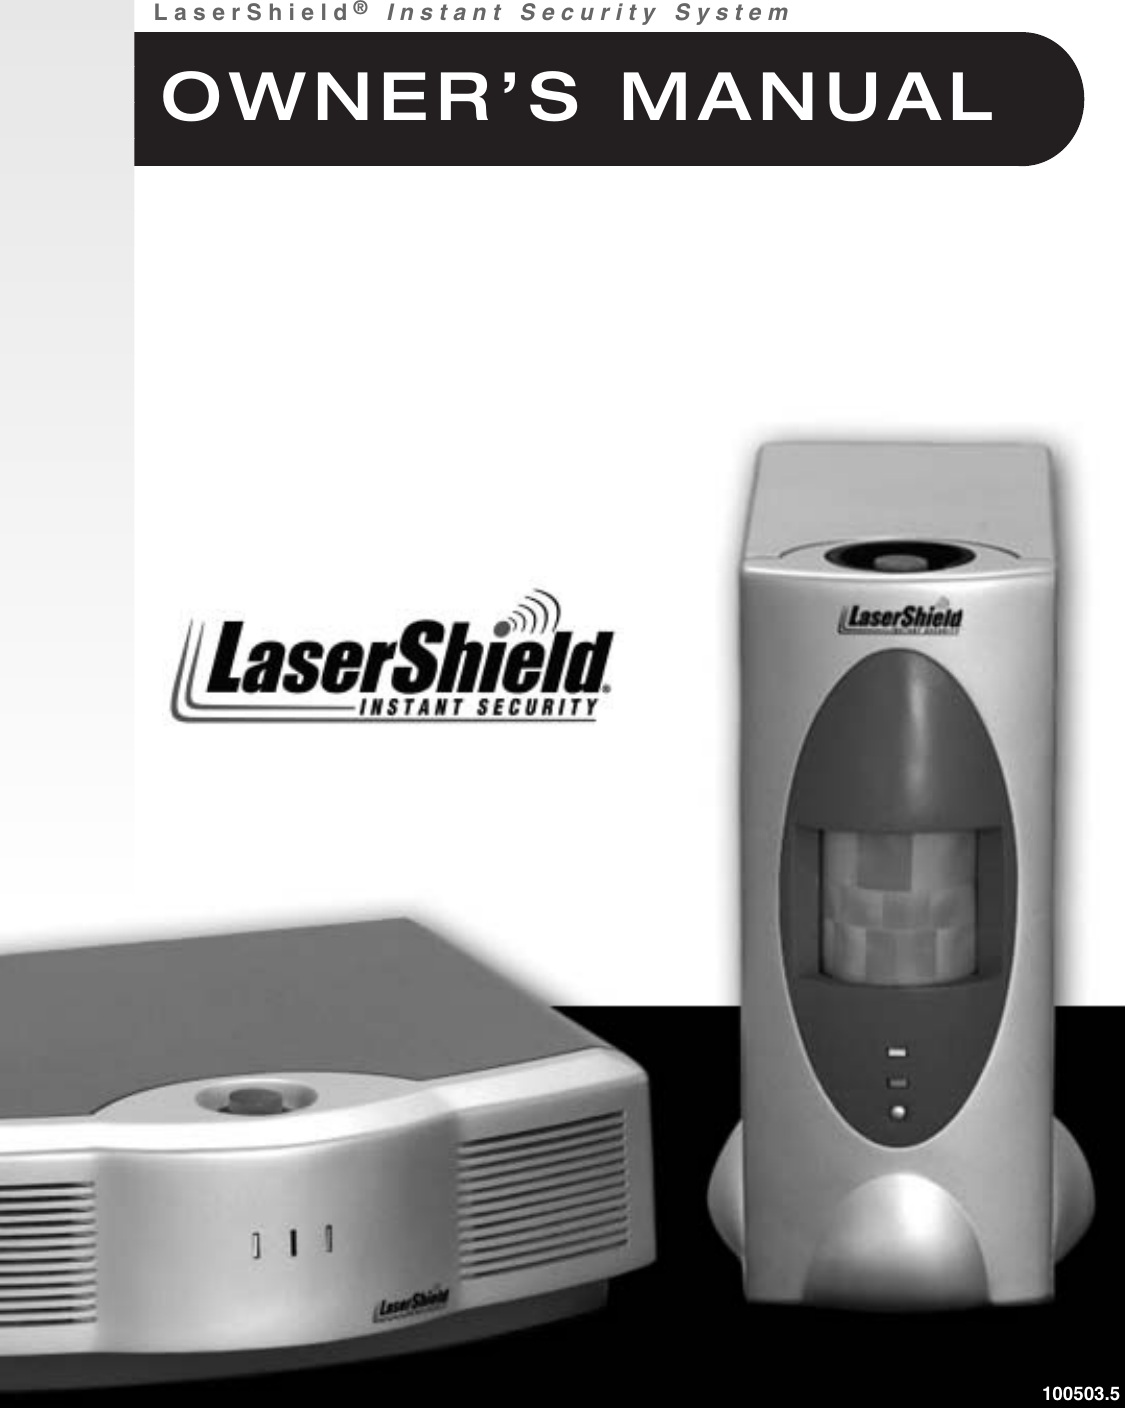 100503.5LaserShield®Instant Security SystemOWNER’S MANUAL